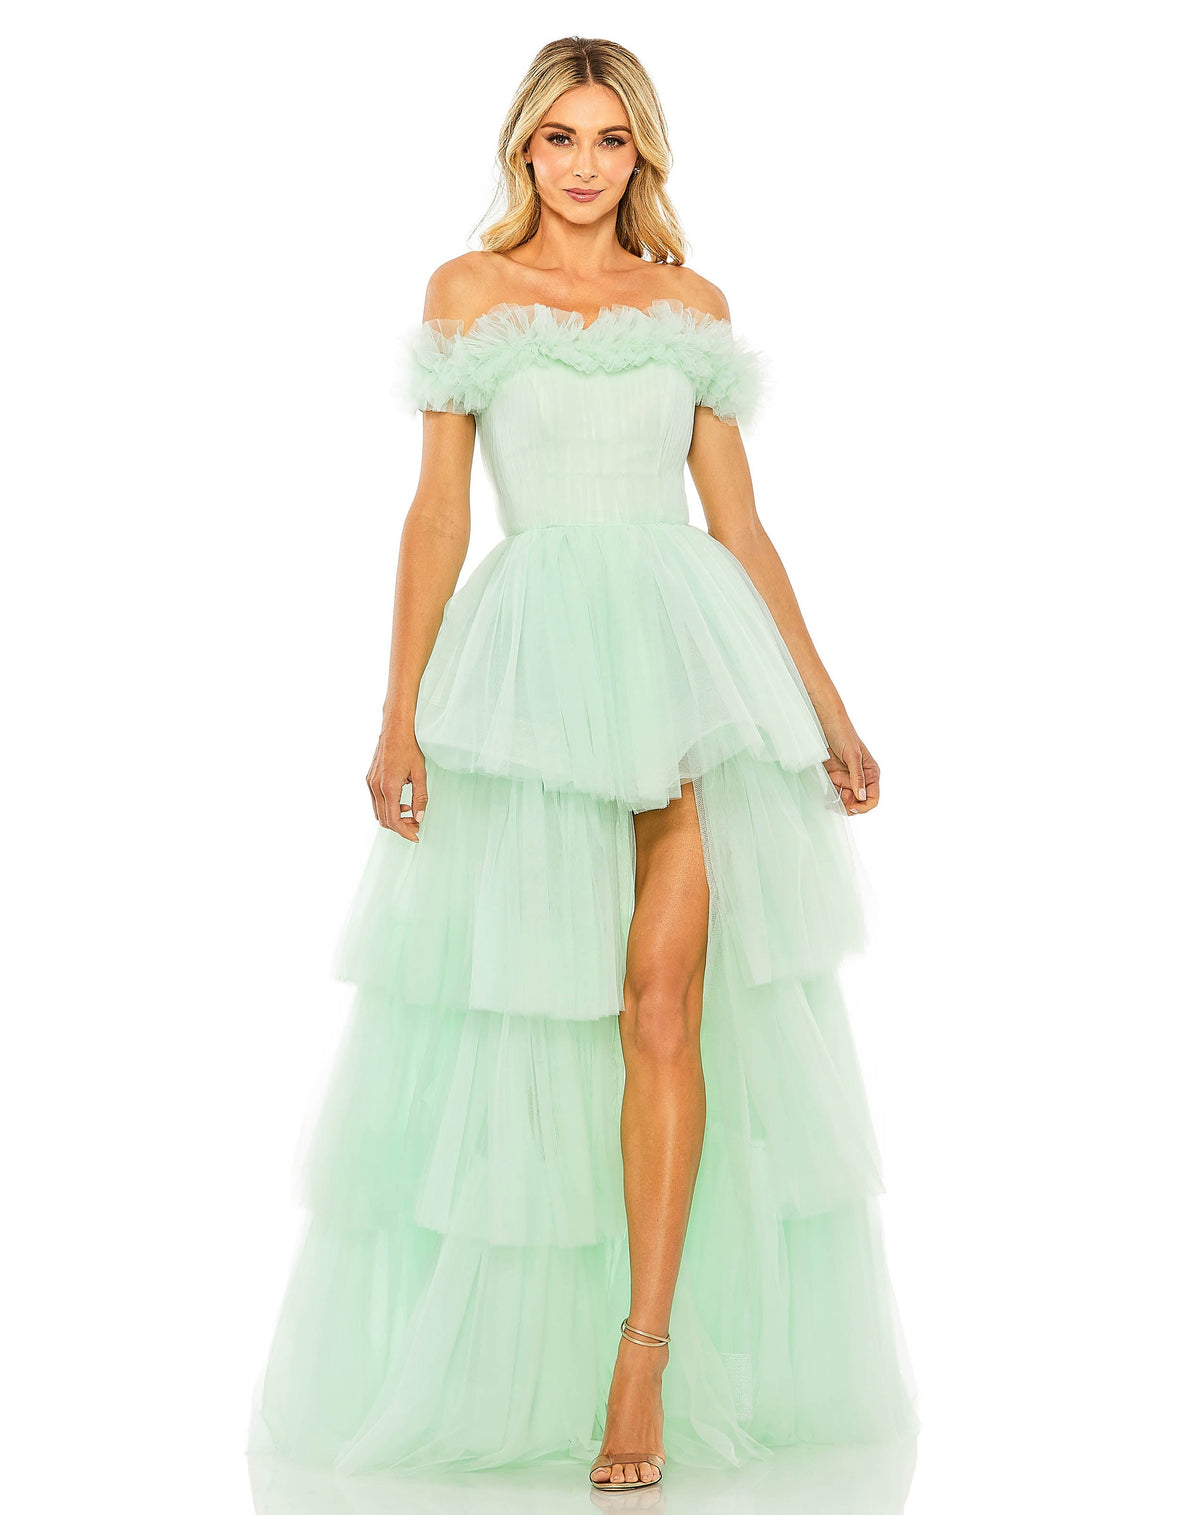 mac duggal, mommy and me dresses, Off The Shoulder Tulle Gown - Mint, Style #20570 pairs with Style #20586